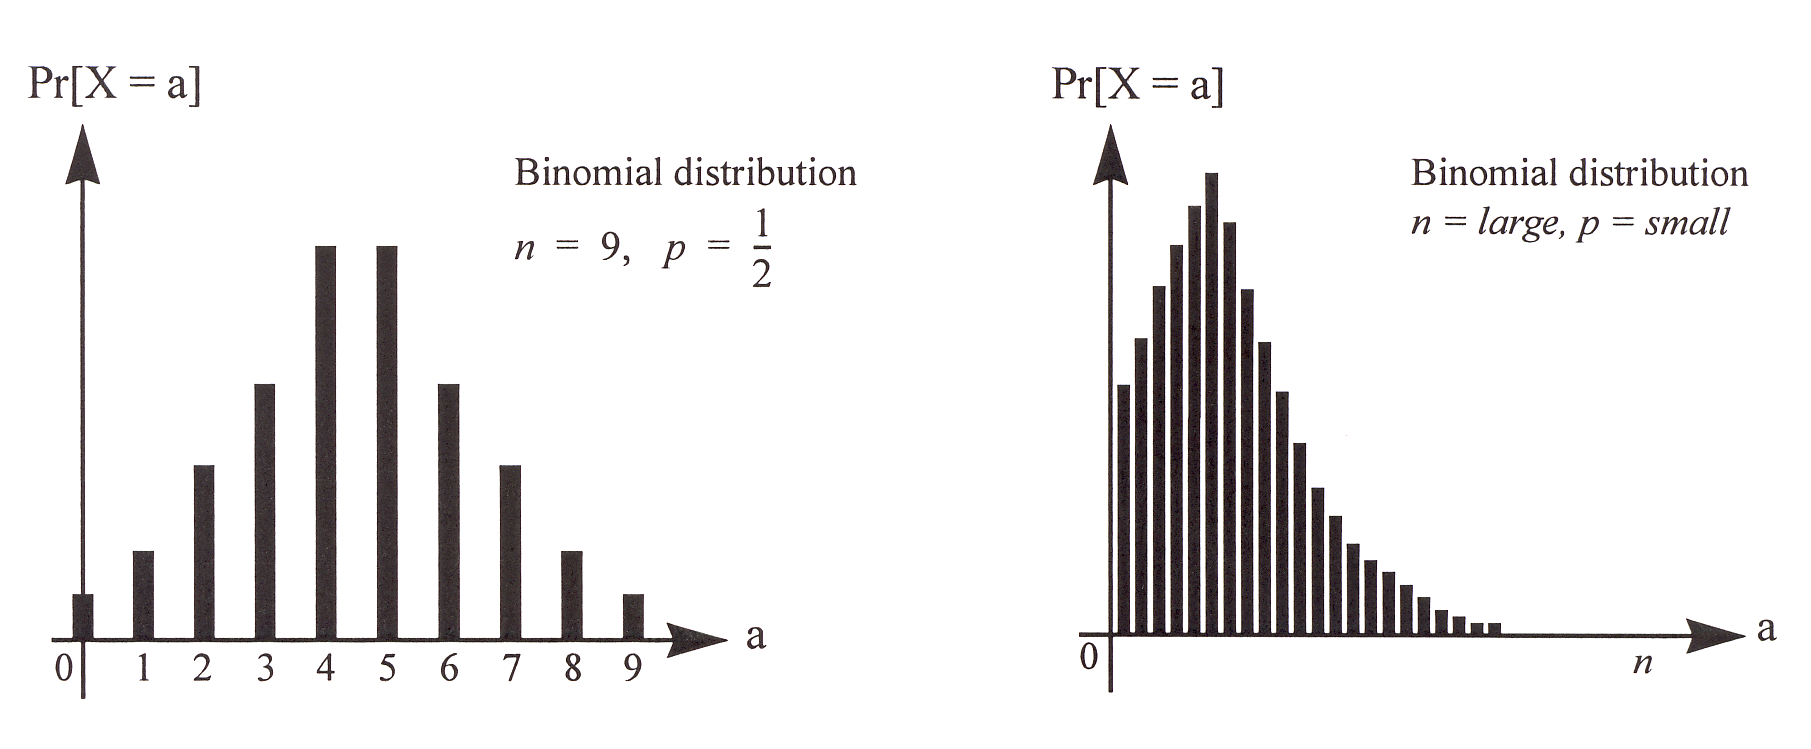 Figure 3: The binomial distributions for two choices of (n,p).